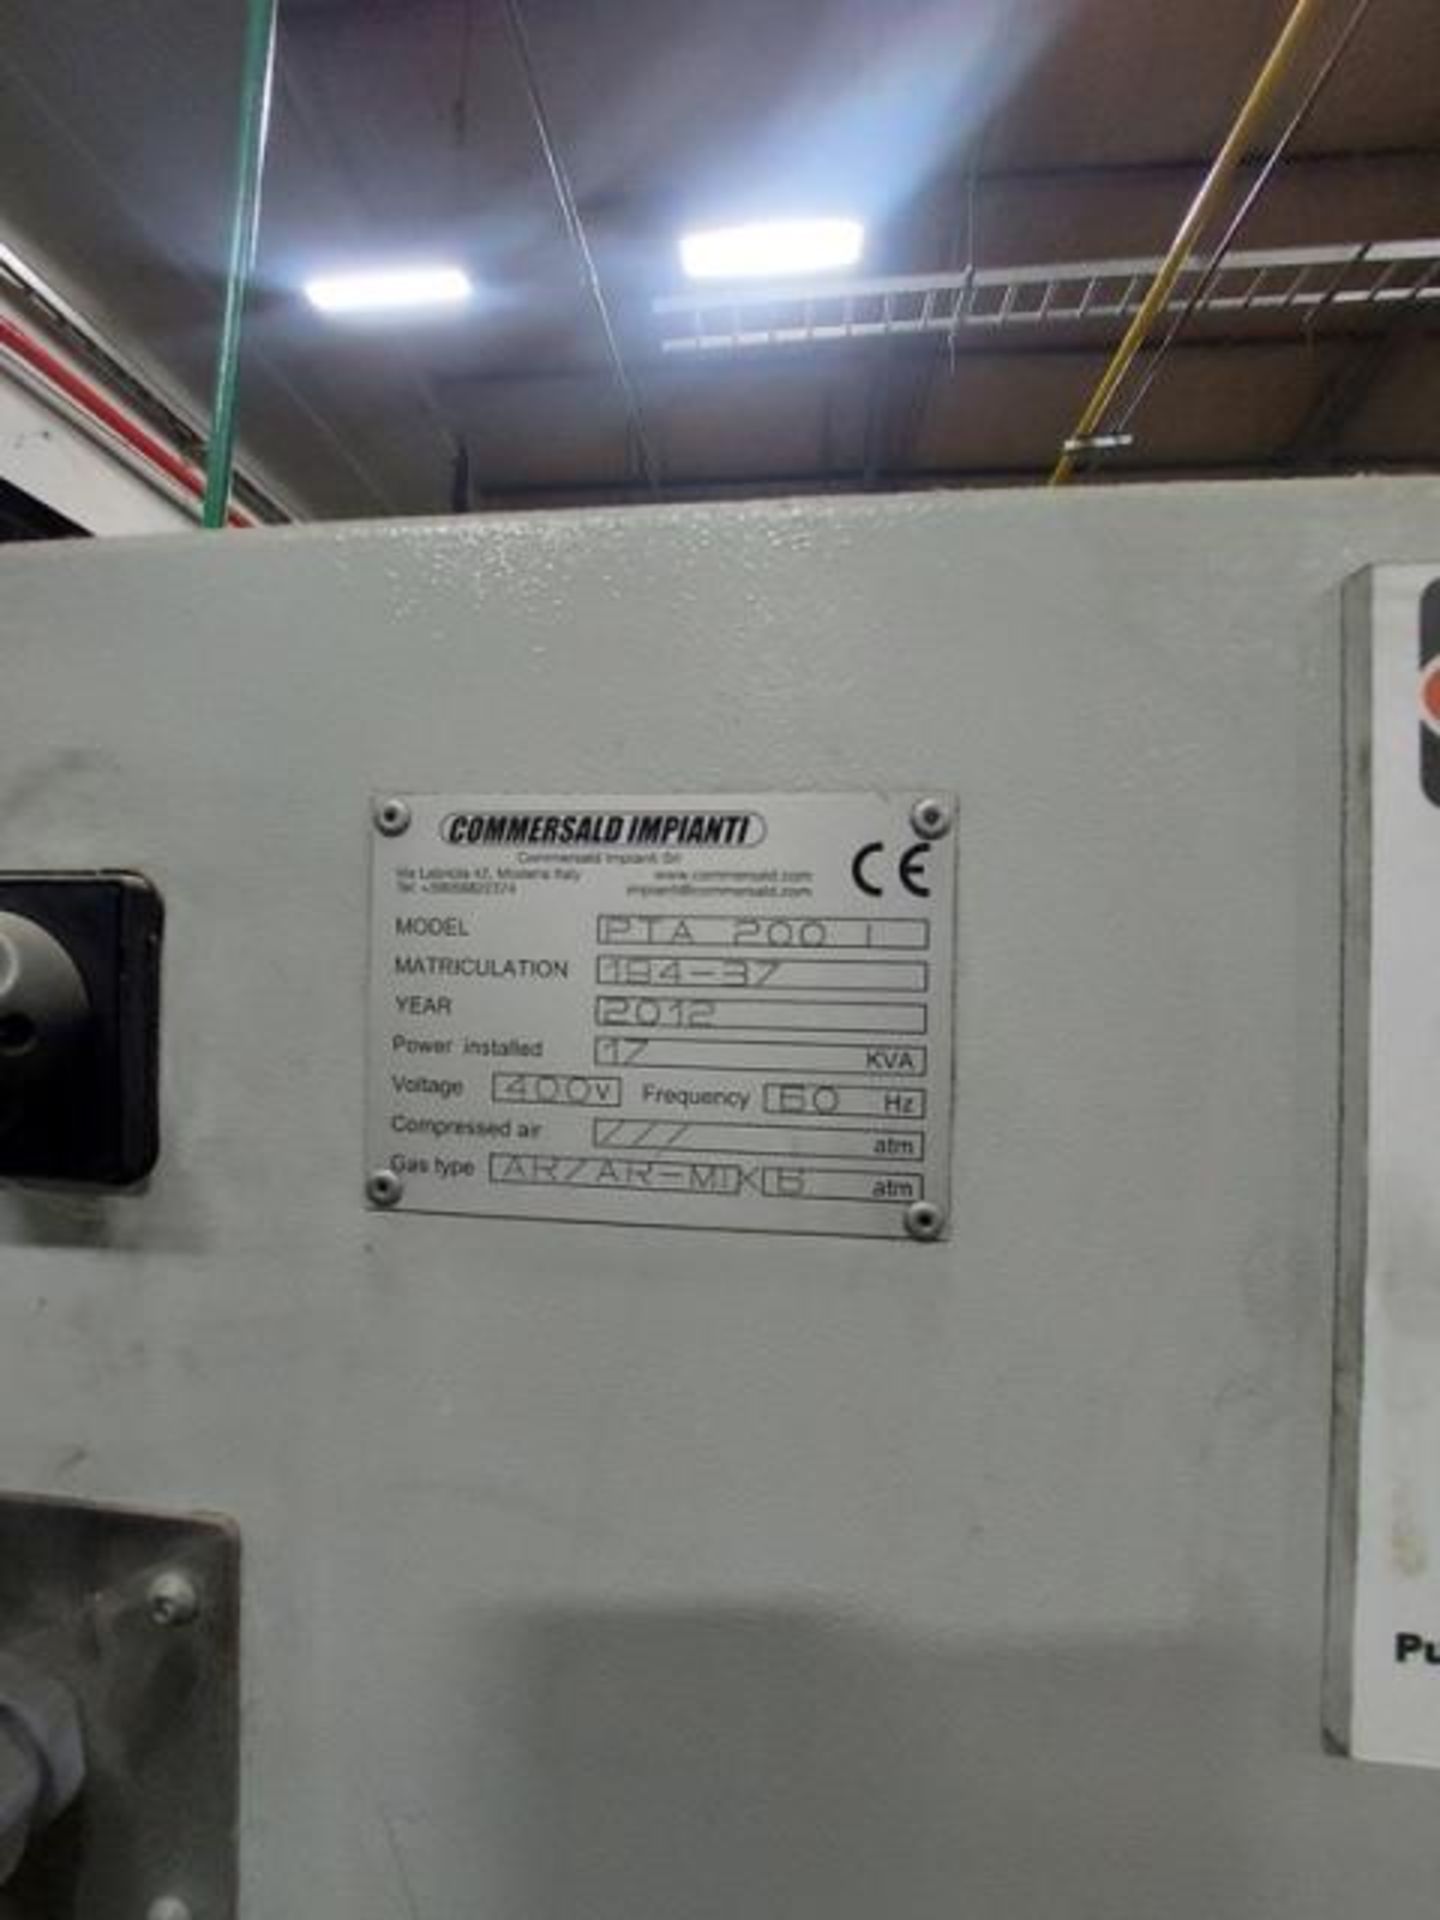 COMMERSALD IMPIANTI PTA200 ROT PTA WELDING CLADDING SYSTEM, S/N 187-09, NEW 2013 - Image 8 of 9